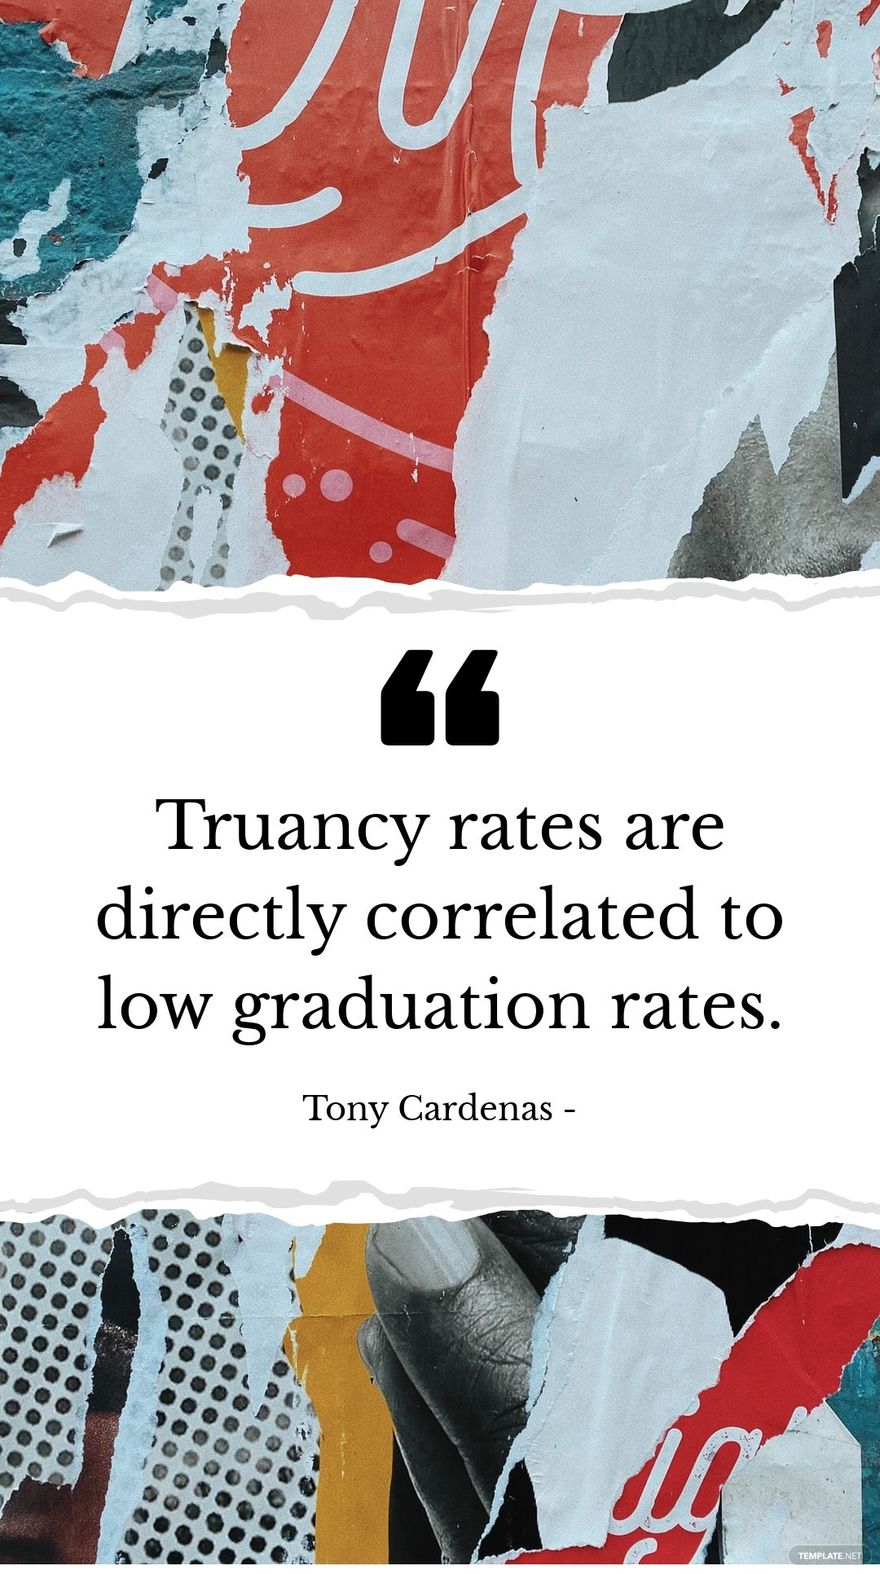 Free Tony Cardenas - Truancy rates are directly correlated to low graduation rates.